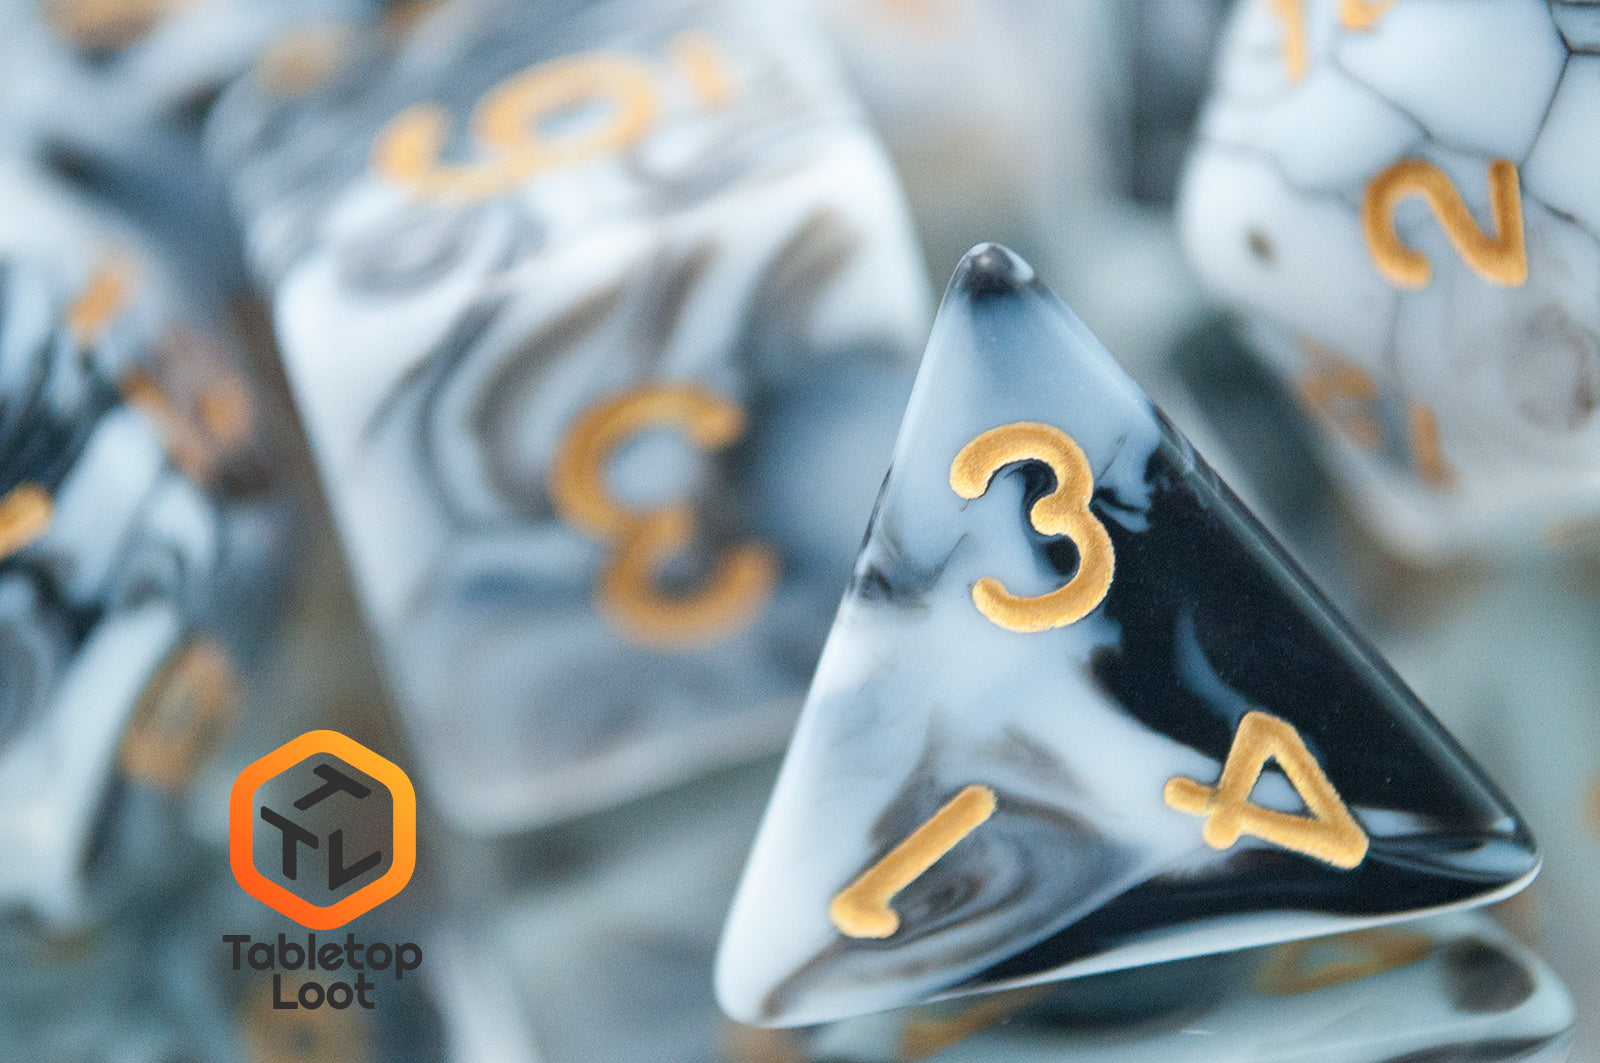 A close up of the D4 from the Rolling Thunder 7 piece dice set from Tabletop Loot with swirls of white, grey, and black resin and gold numbering.